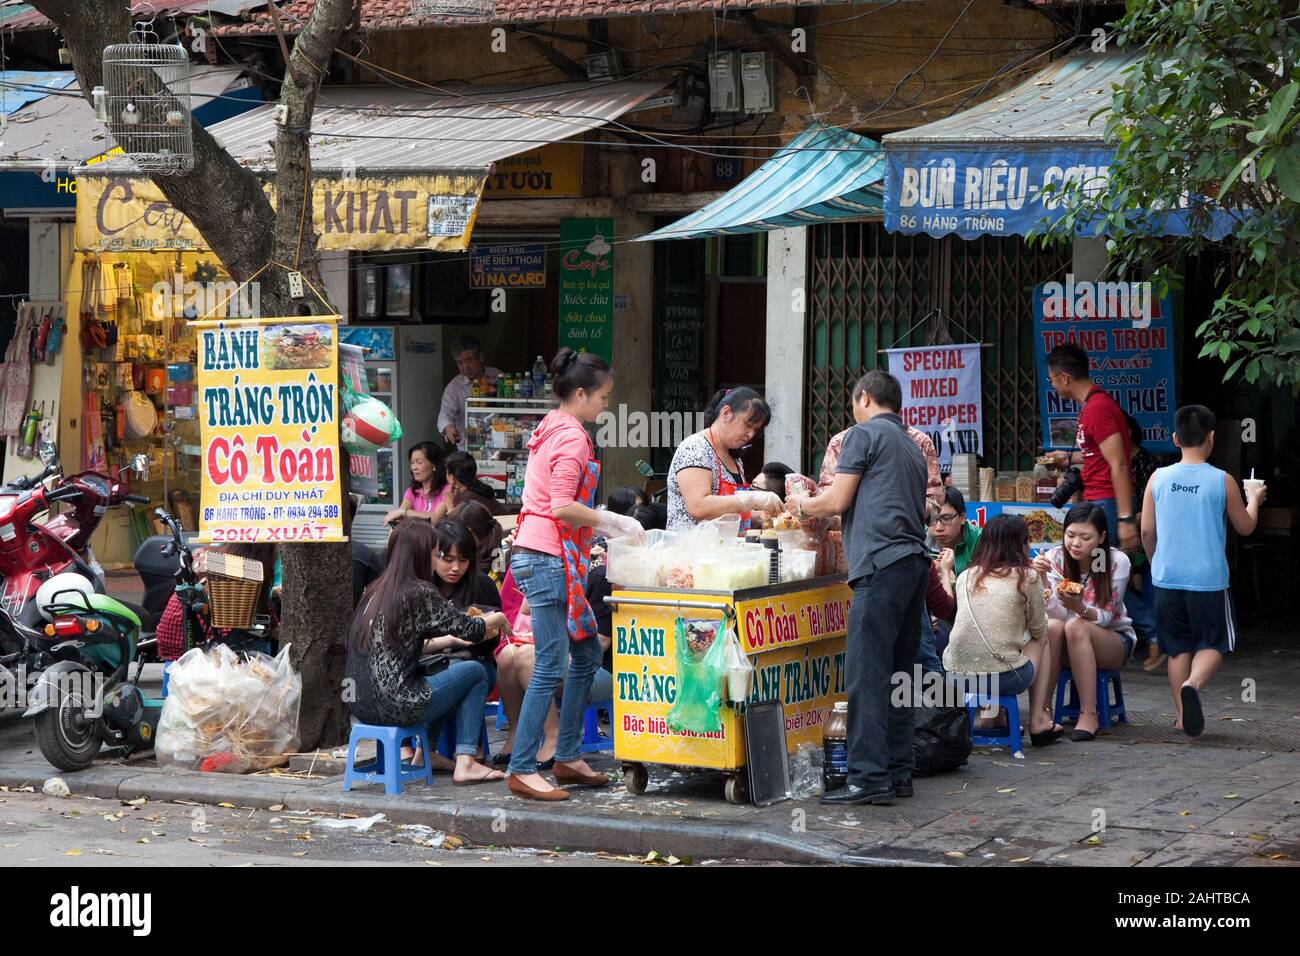 Asian people sitting on small chairs eat their lunch together at a fast food vendor Stock Photo